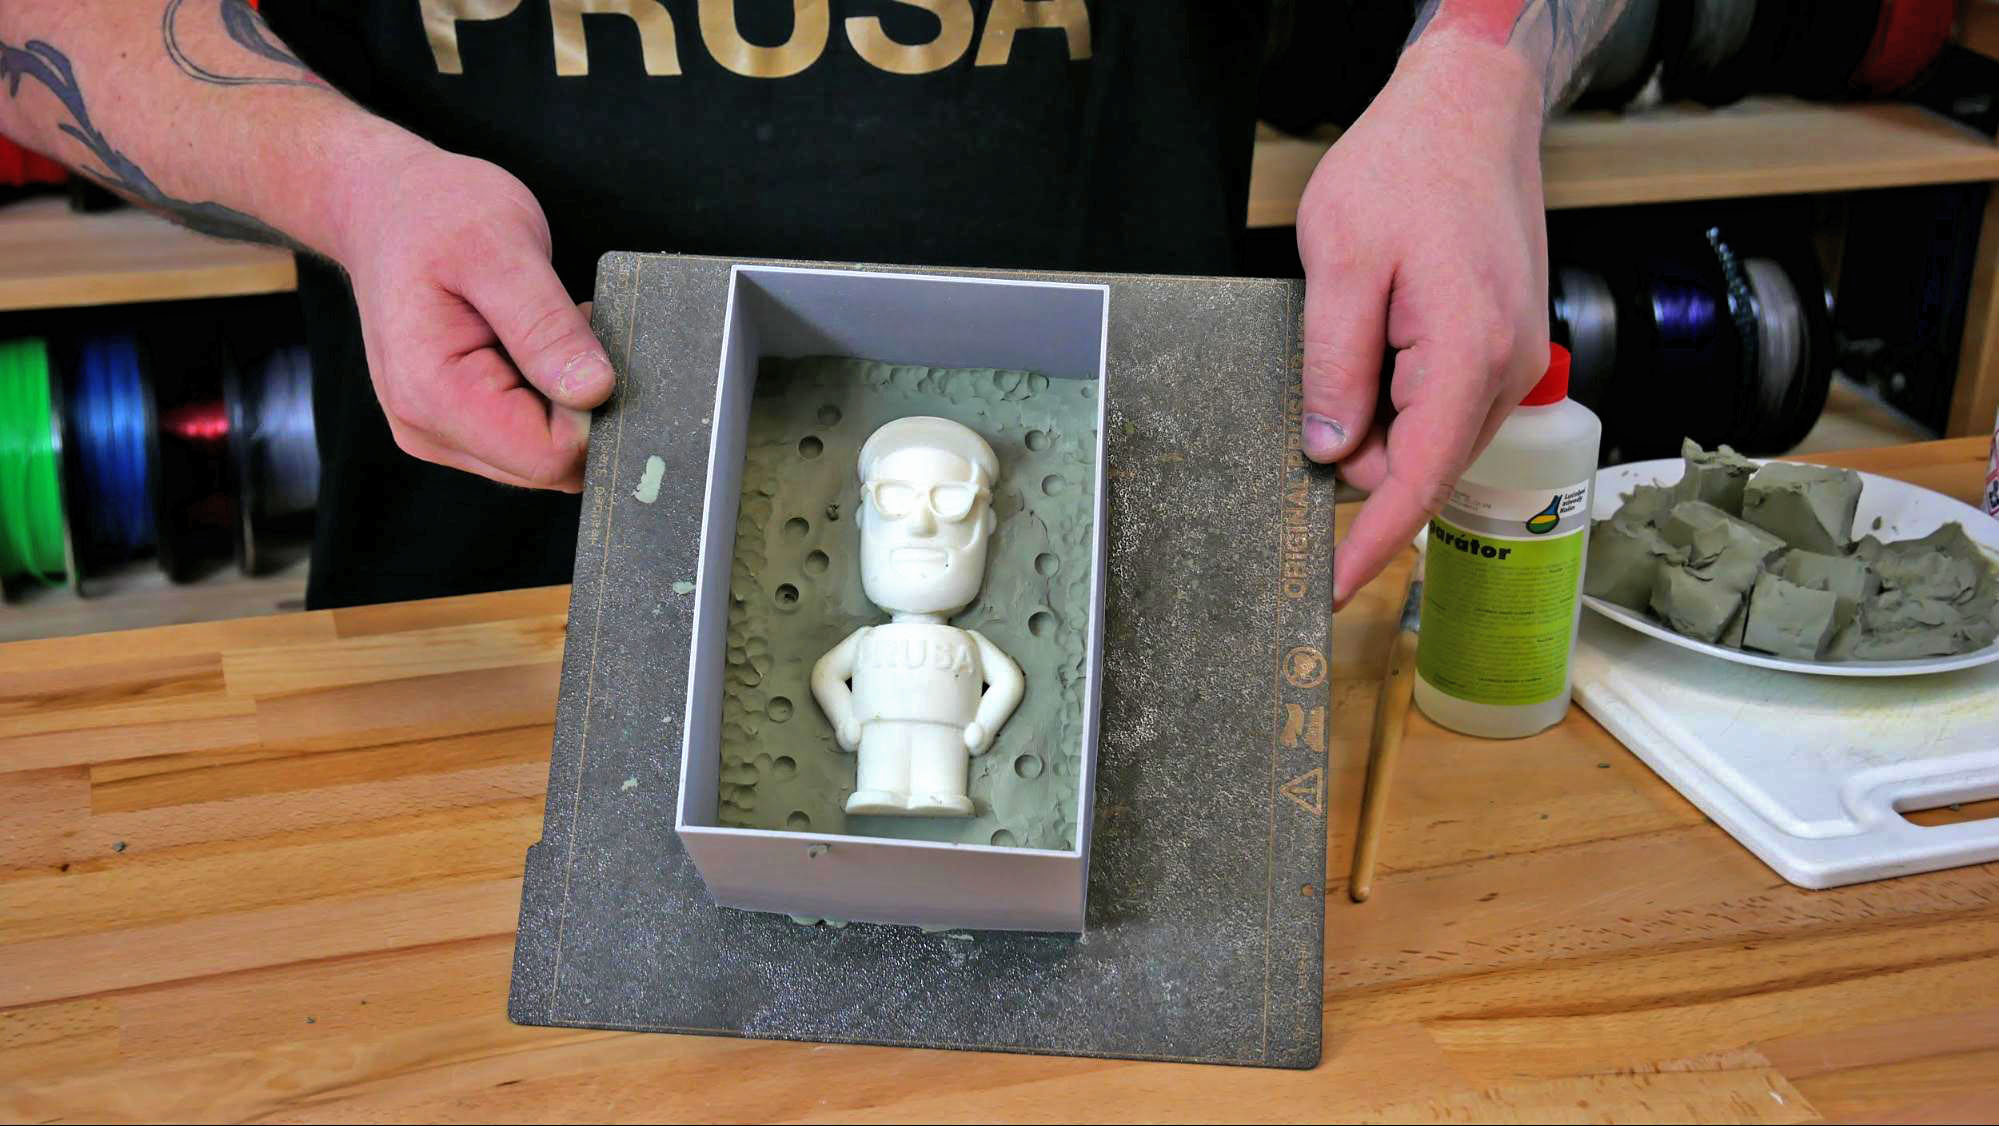 How to Make Silicone Molds: A Practical Guide